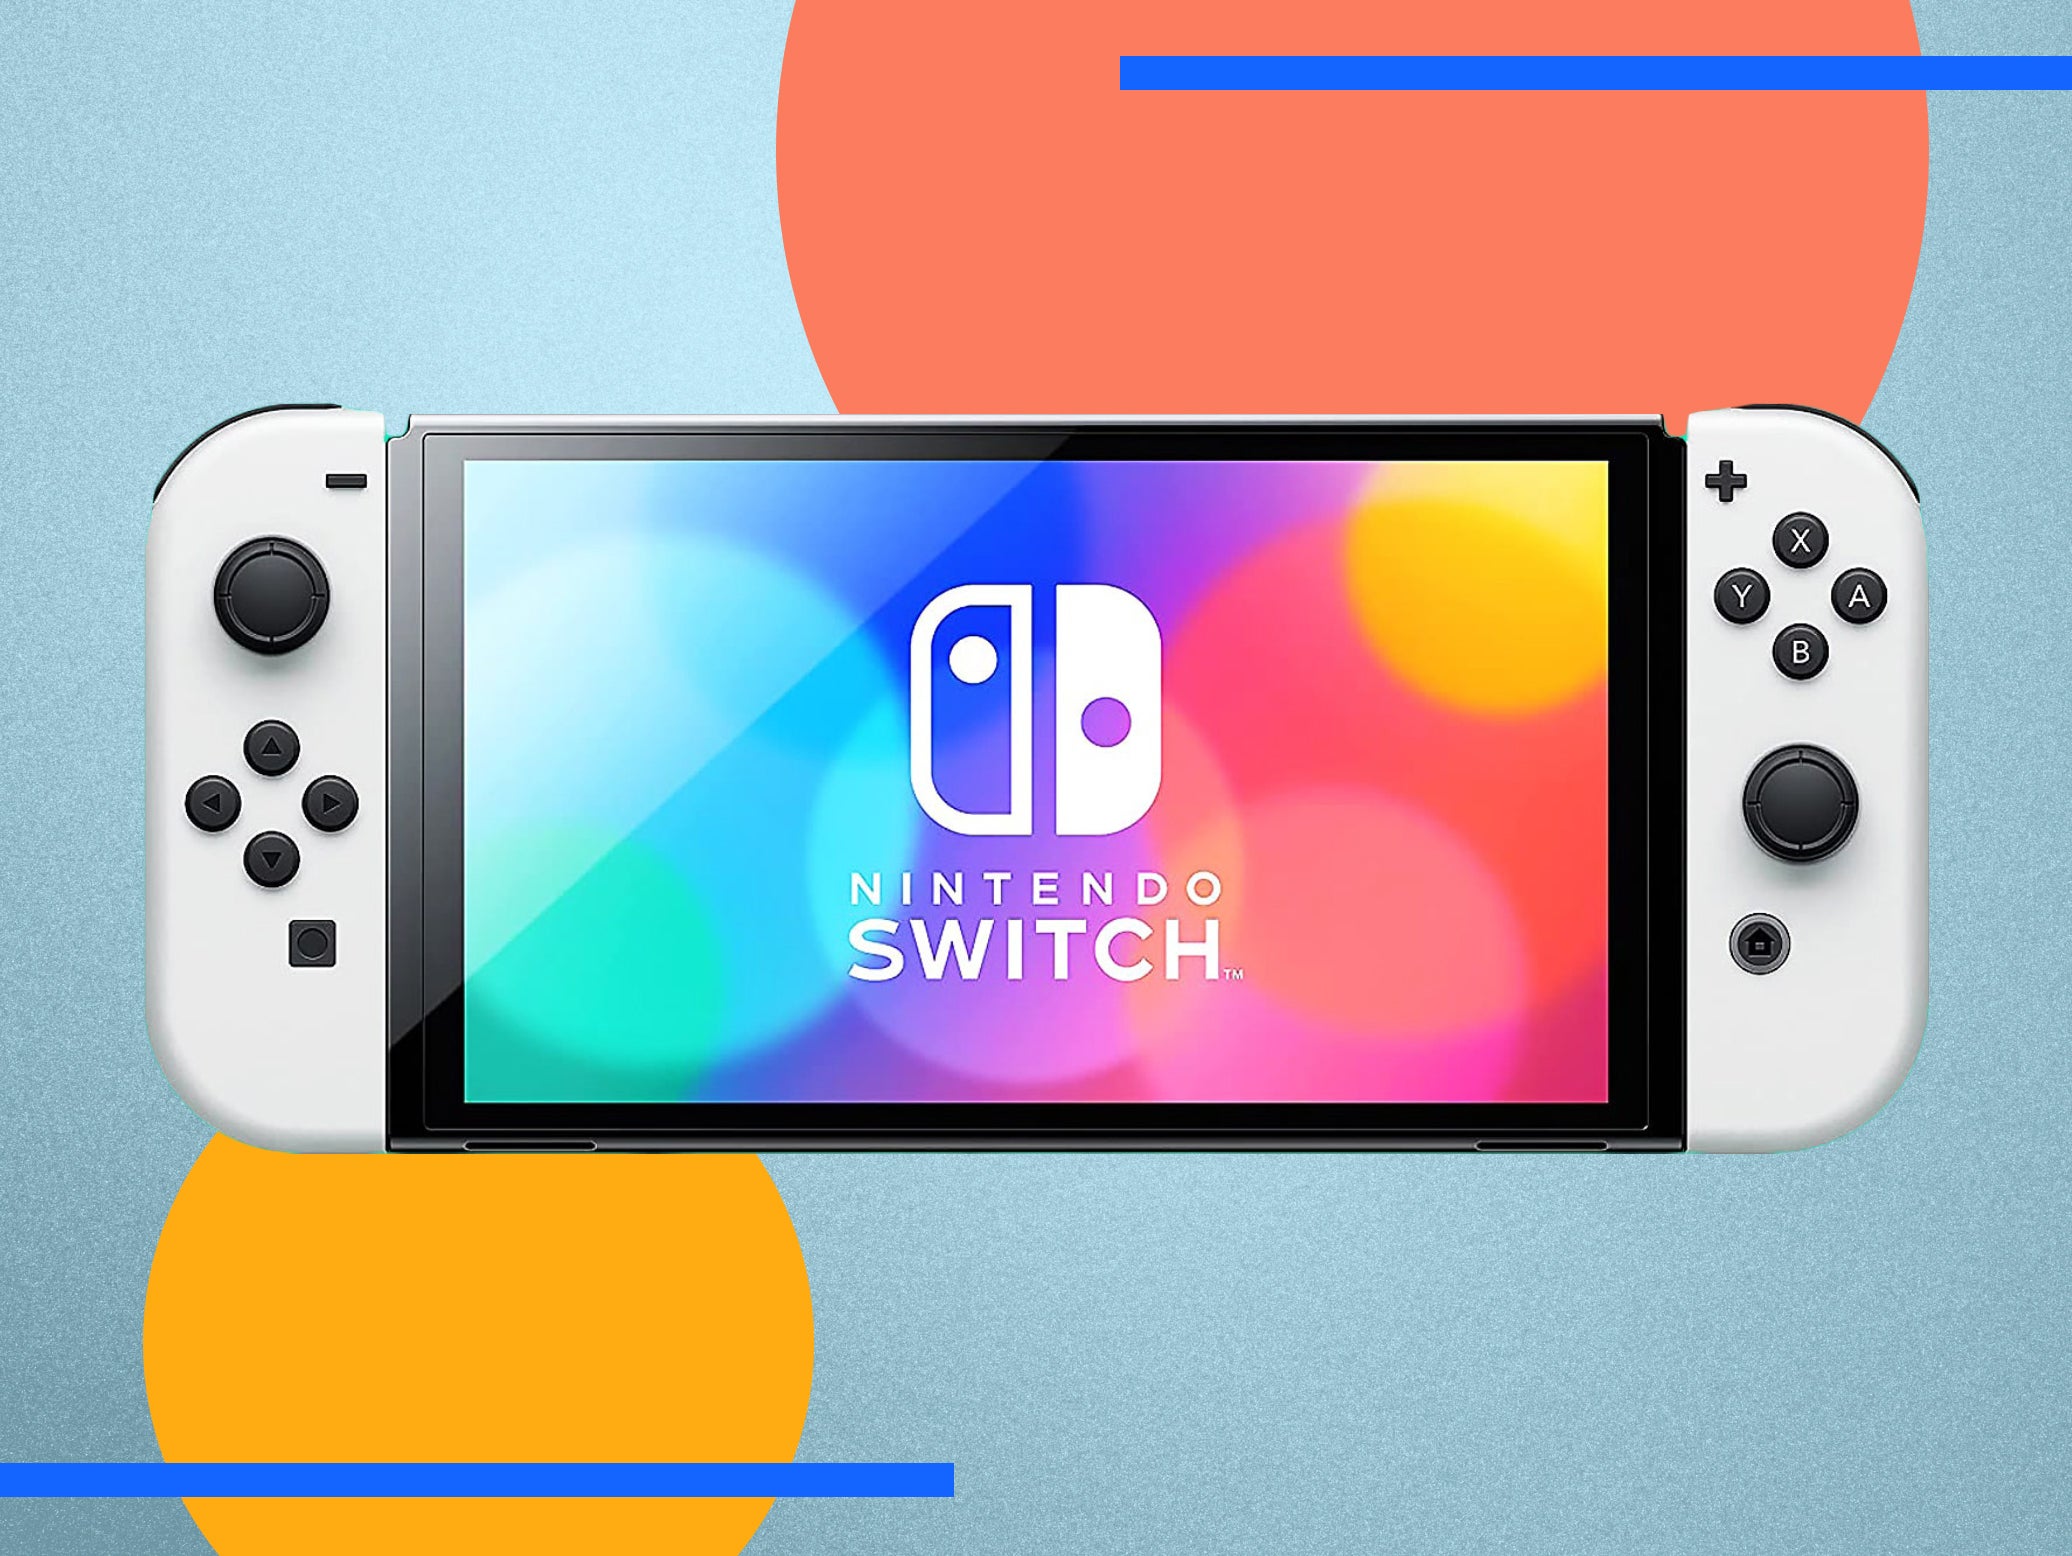 Revision plejeforældre synonymordbog Upcoming Nintendo Switch games 2022: The biggest new releases coming soon |  The Independent